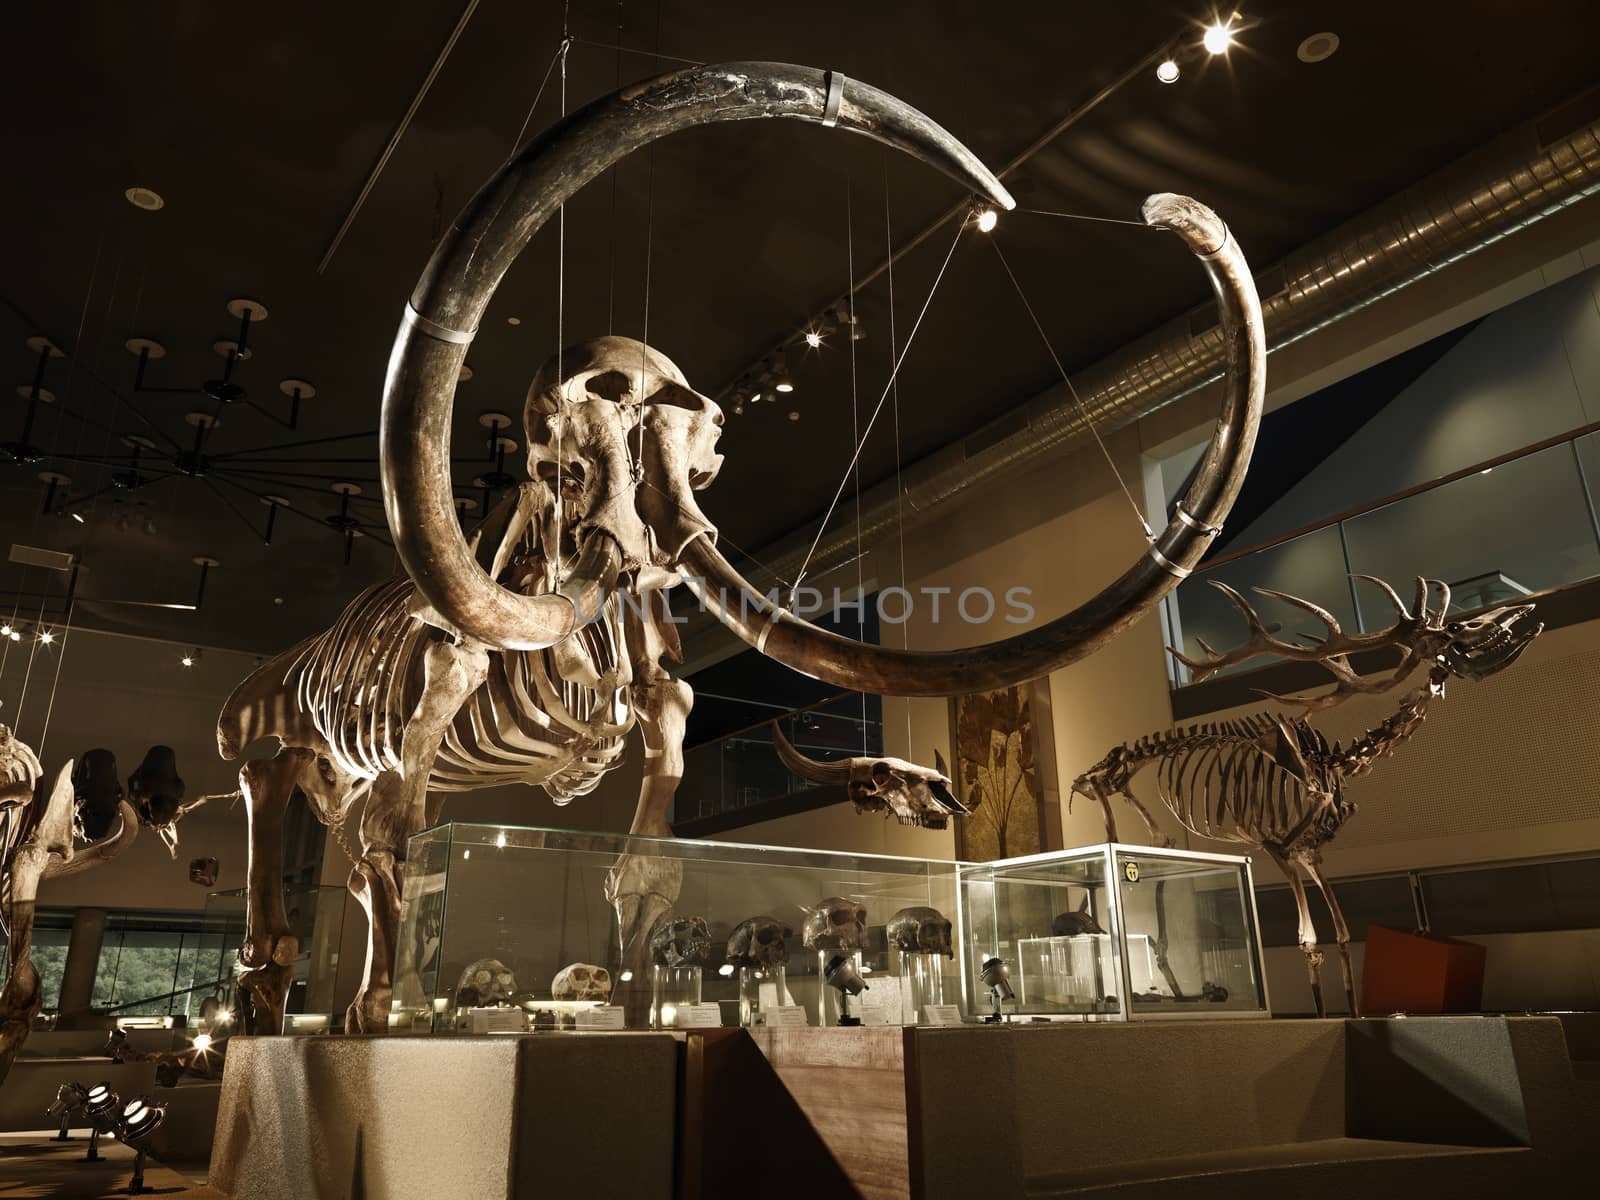 Large mammoth skeleton in a museum with backlight
